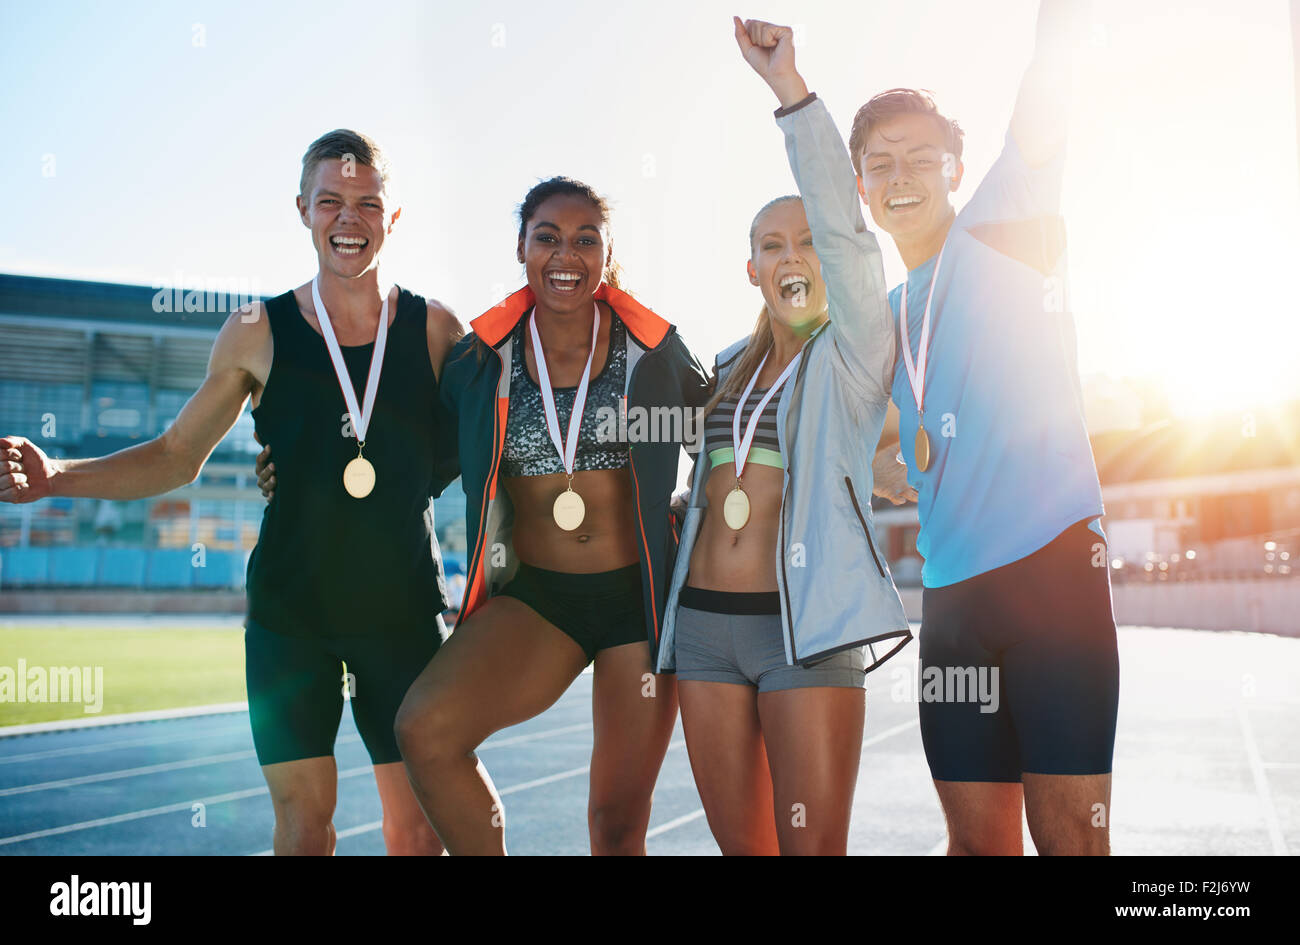 Portrait of ecstatic young athletes together with medals. Group of runners standing together smiling with their hands raised in Stock Photo